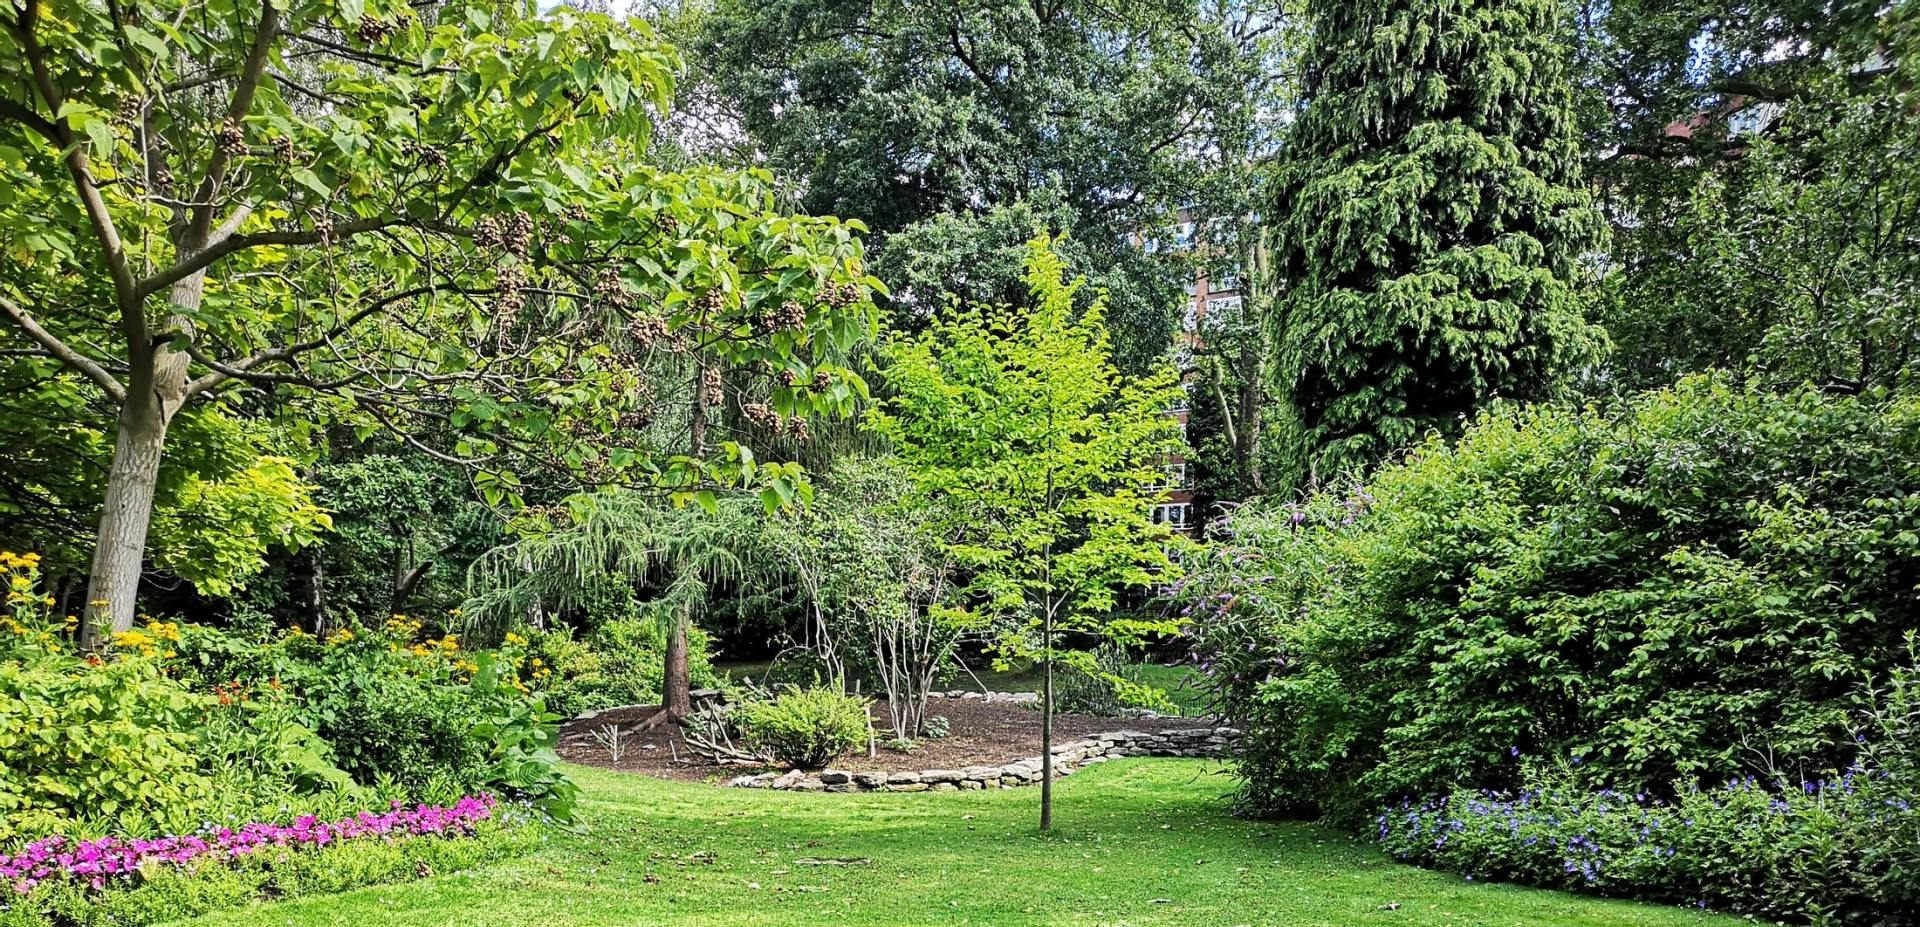 Yard with many trees and plants